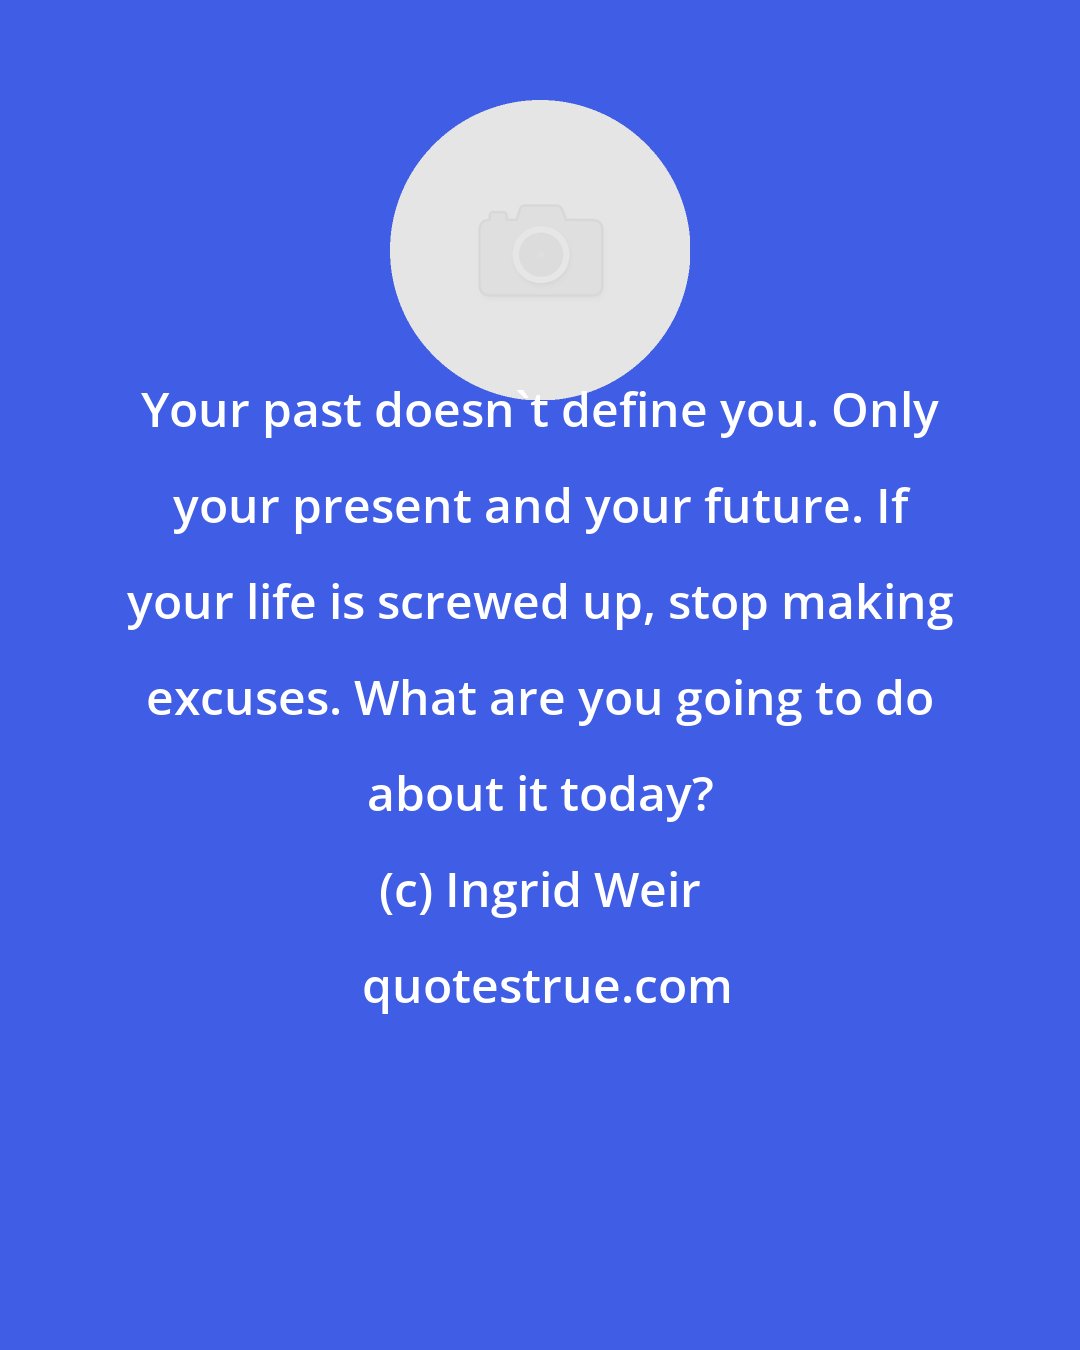 Ingrid Weir: Your past doesn't define you. Only your present and your future. If your life is screwed up, stop making excuses. What are you going to do about it today?